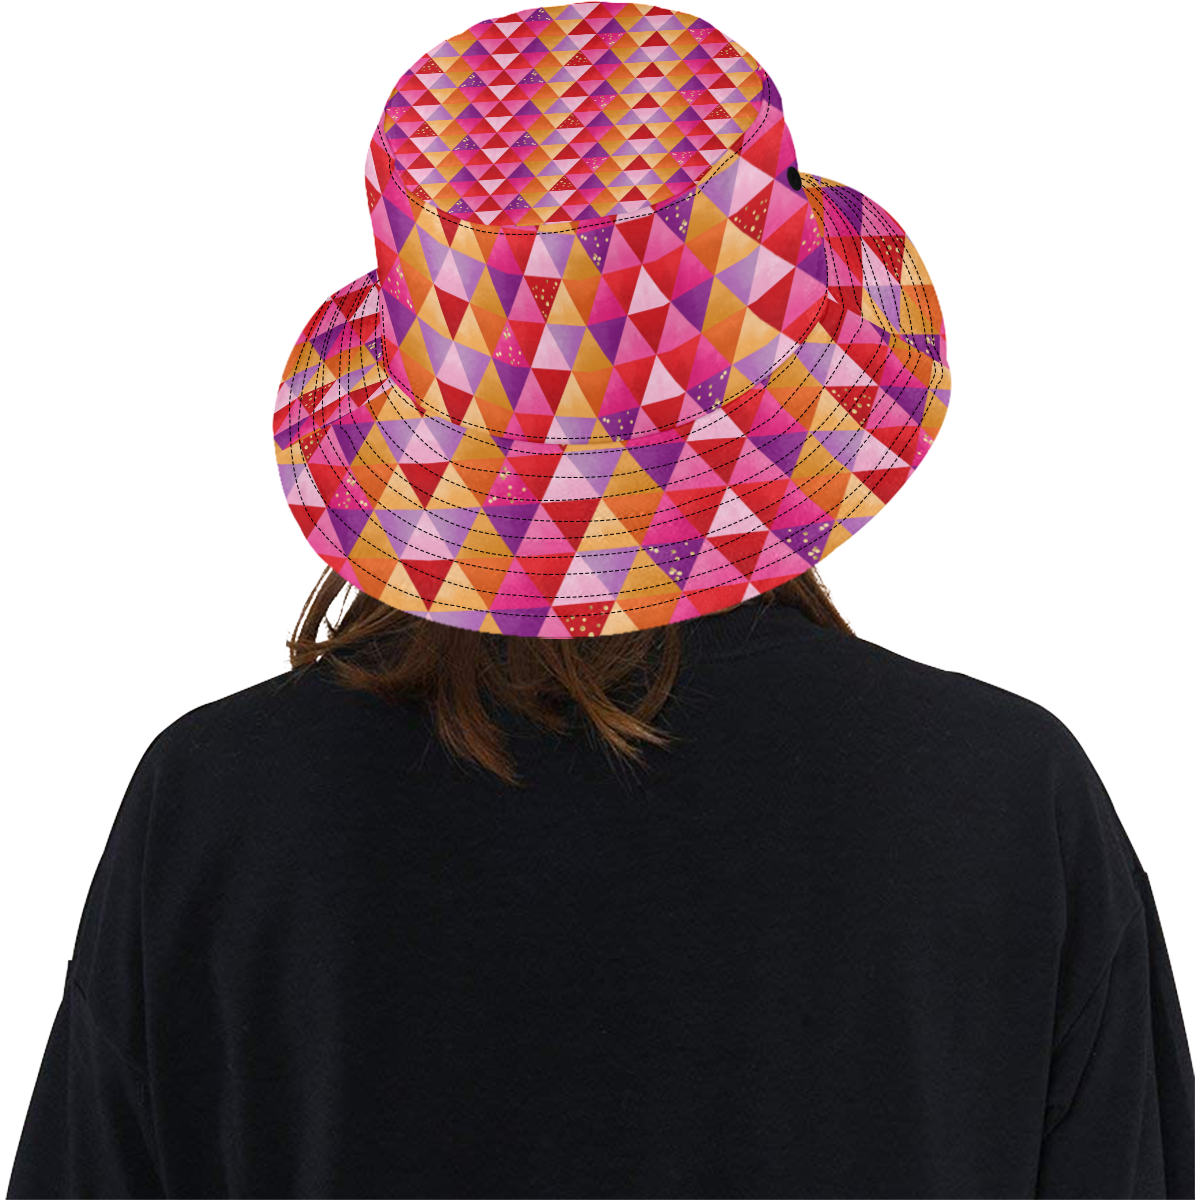 Triangle Pattern - Red Purple Pink Orange Yellow All Over Print Bucket Hat